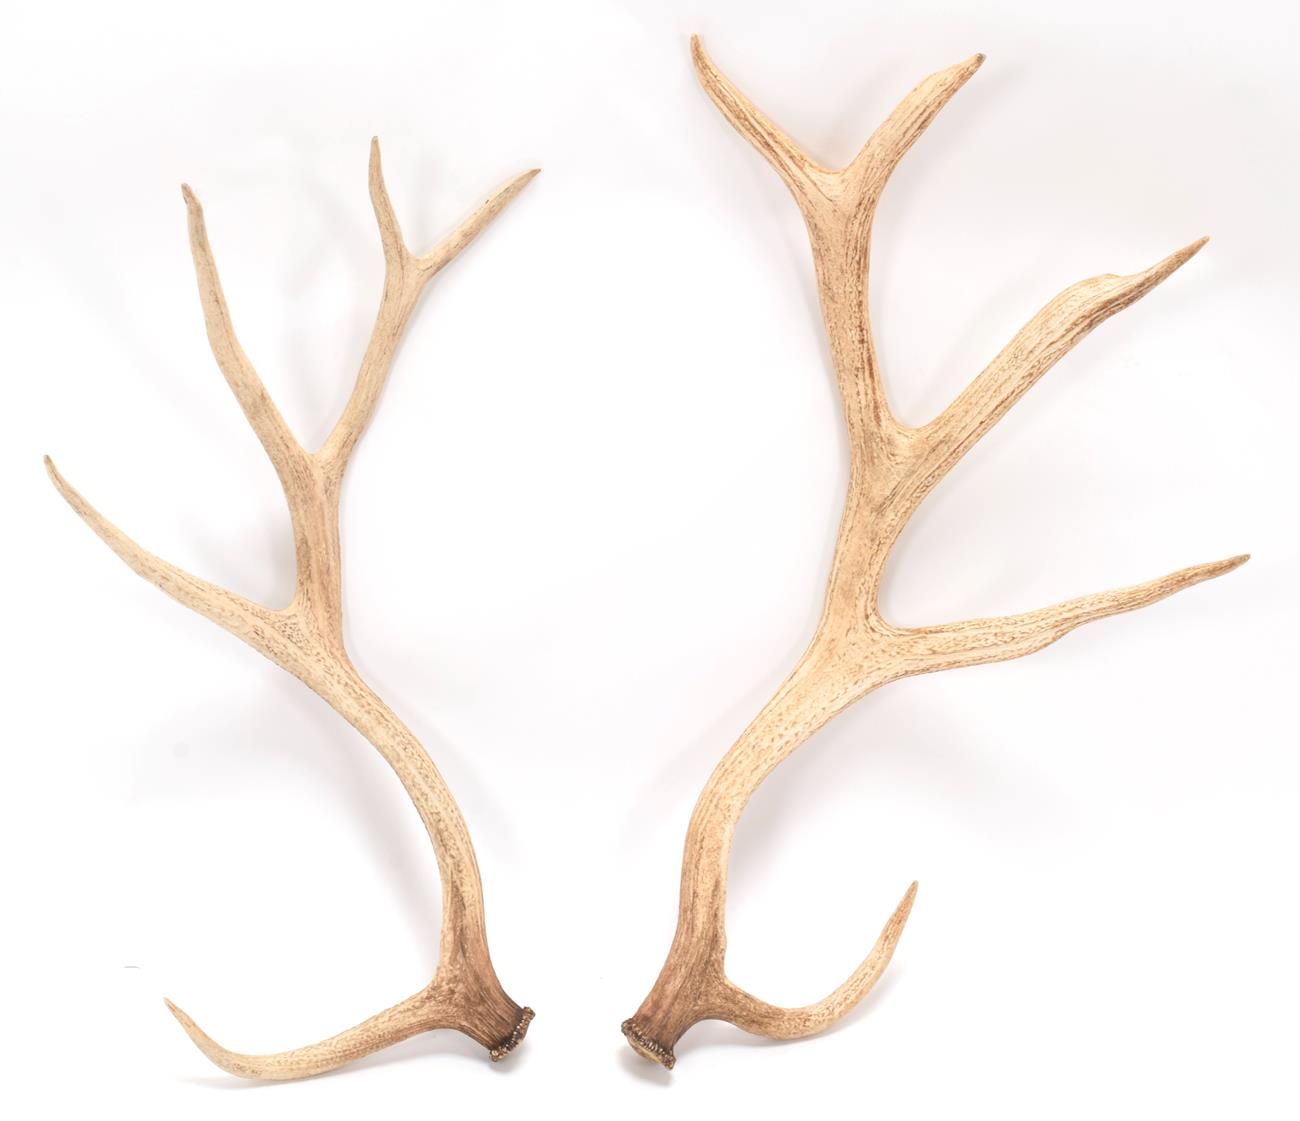 Lot 60 - Antlers/Horns: A Matched Pair of White-Lipped or Thorold's Deer Antlers (Cervus albirostris),...